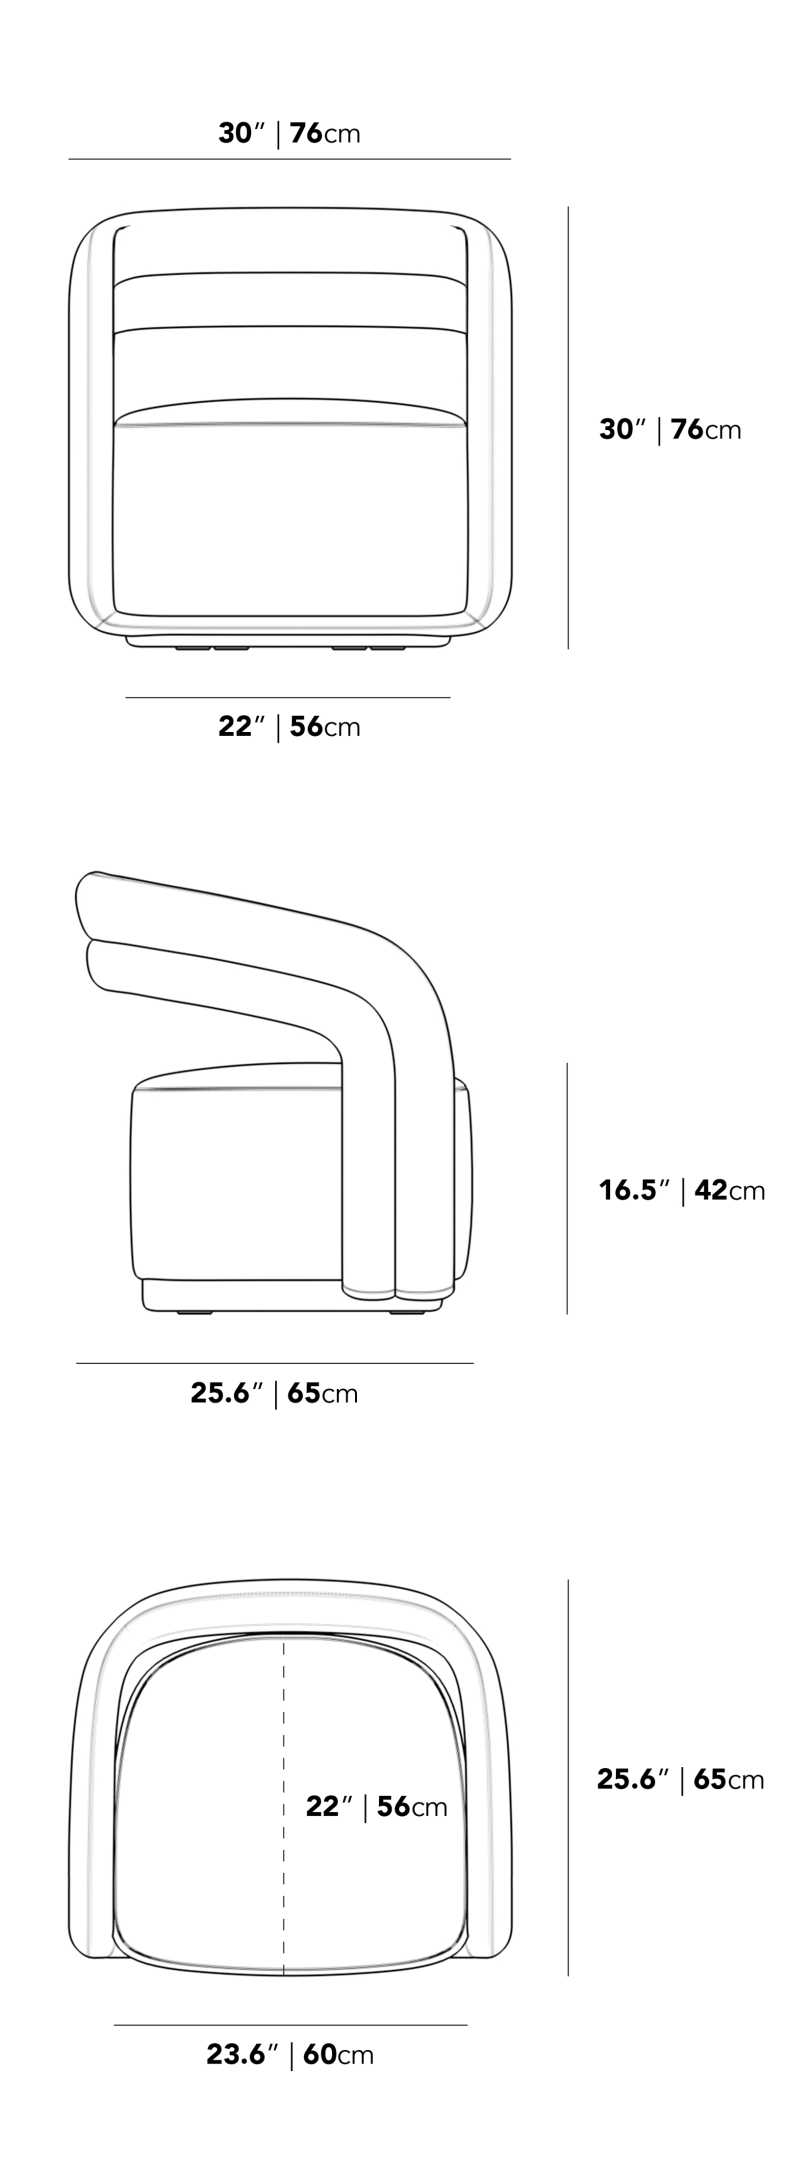 Dimensions for Mia Lounge Chair